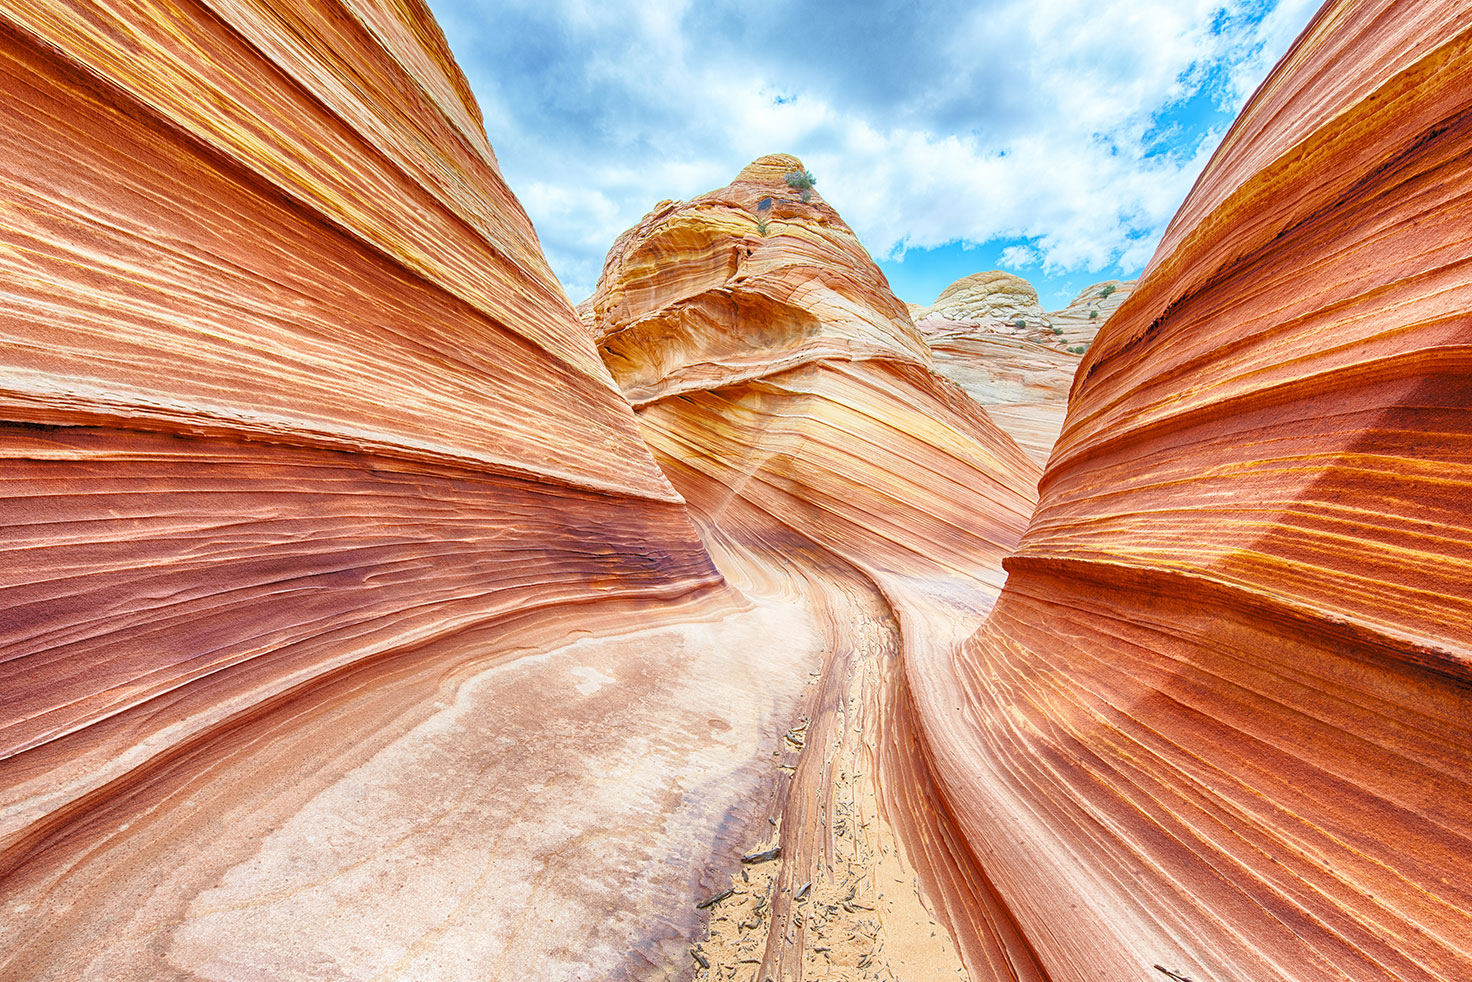 North Coyote Buttes/The Wave